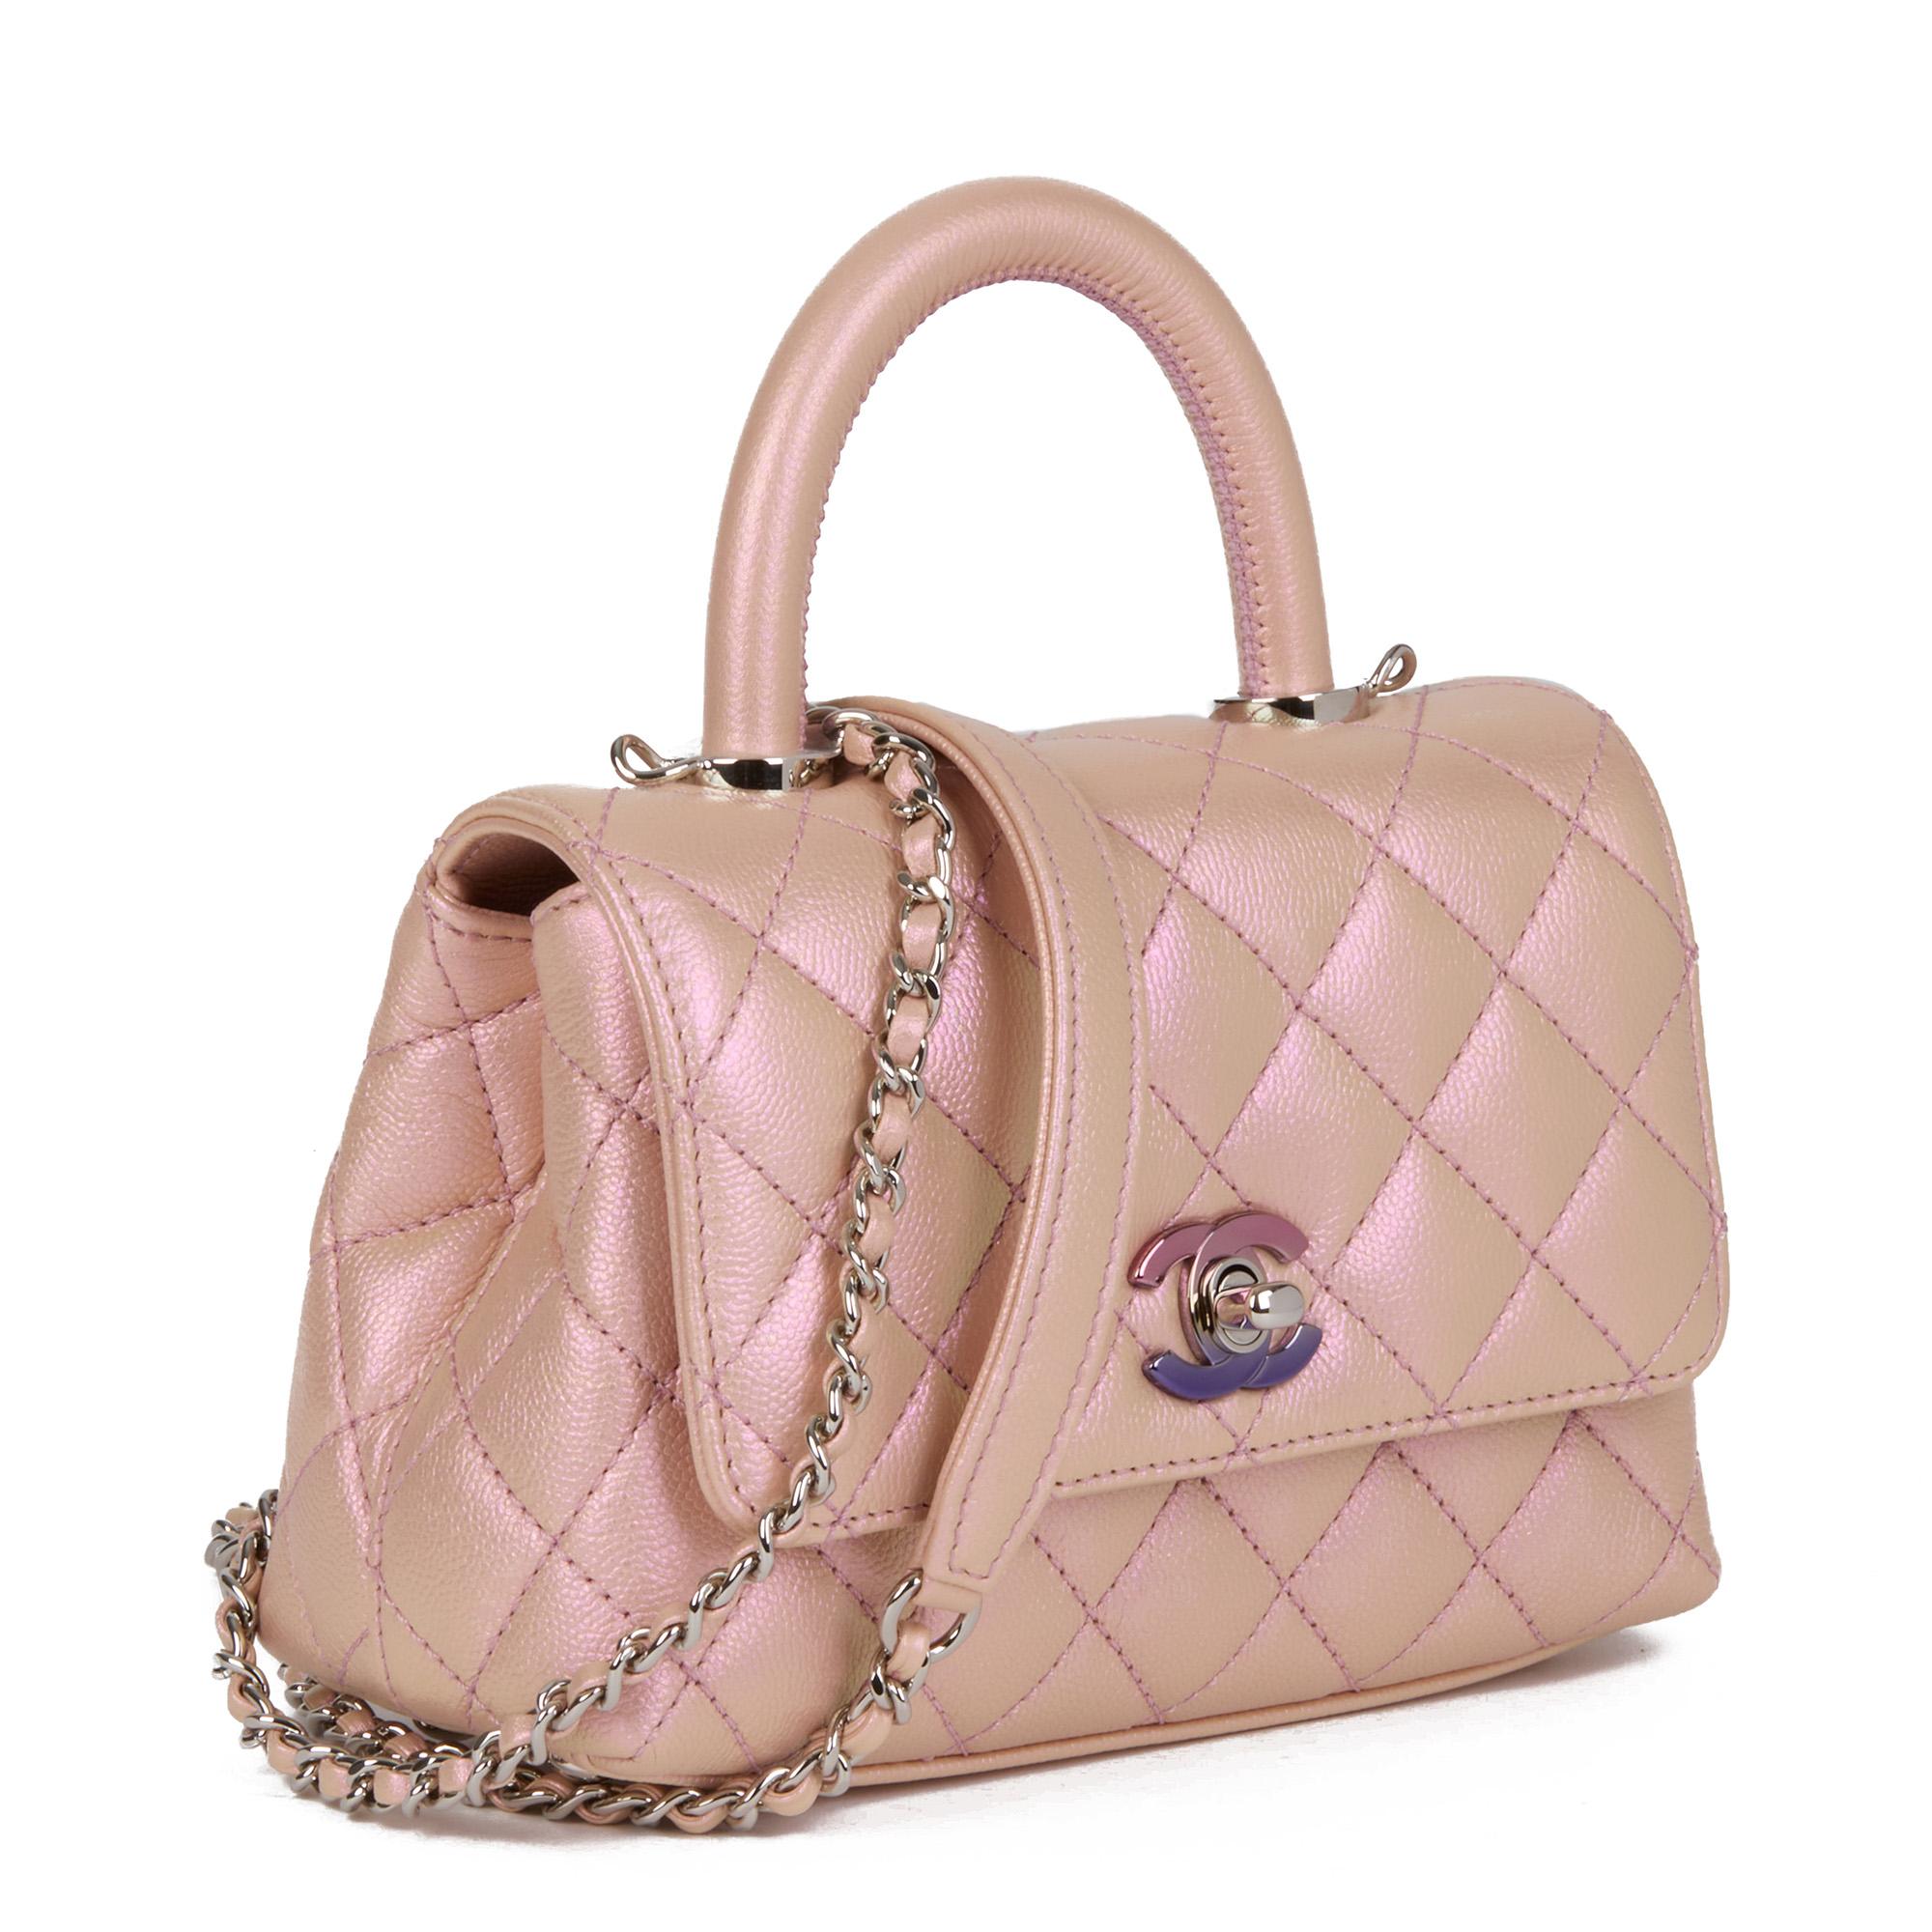 CHANEL
Iridescent Pink Quilted Caviar Leather Mini Coco Top Handle

Serial Number: UTKTHPE6
Age (Circa): 2021
Accompanied By: Chanel Dust Bag, Box, Protective Felt
Authenticity Details: Microchip (Made in Italy)
Gender: Ladies
Type: Top Handle,